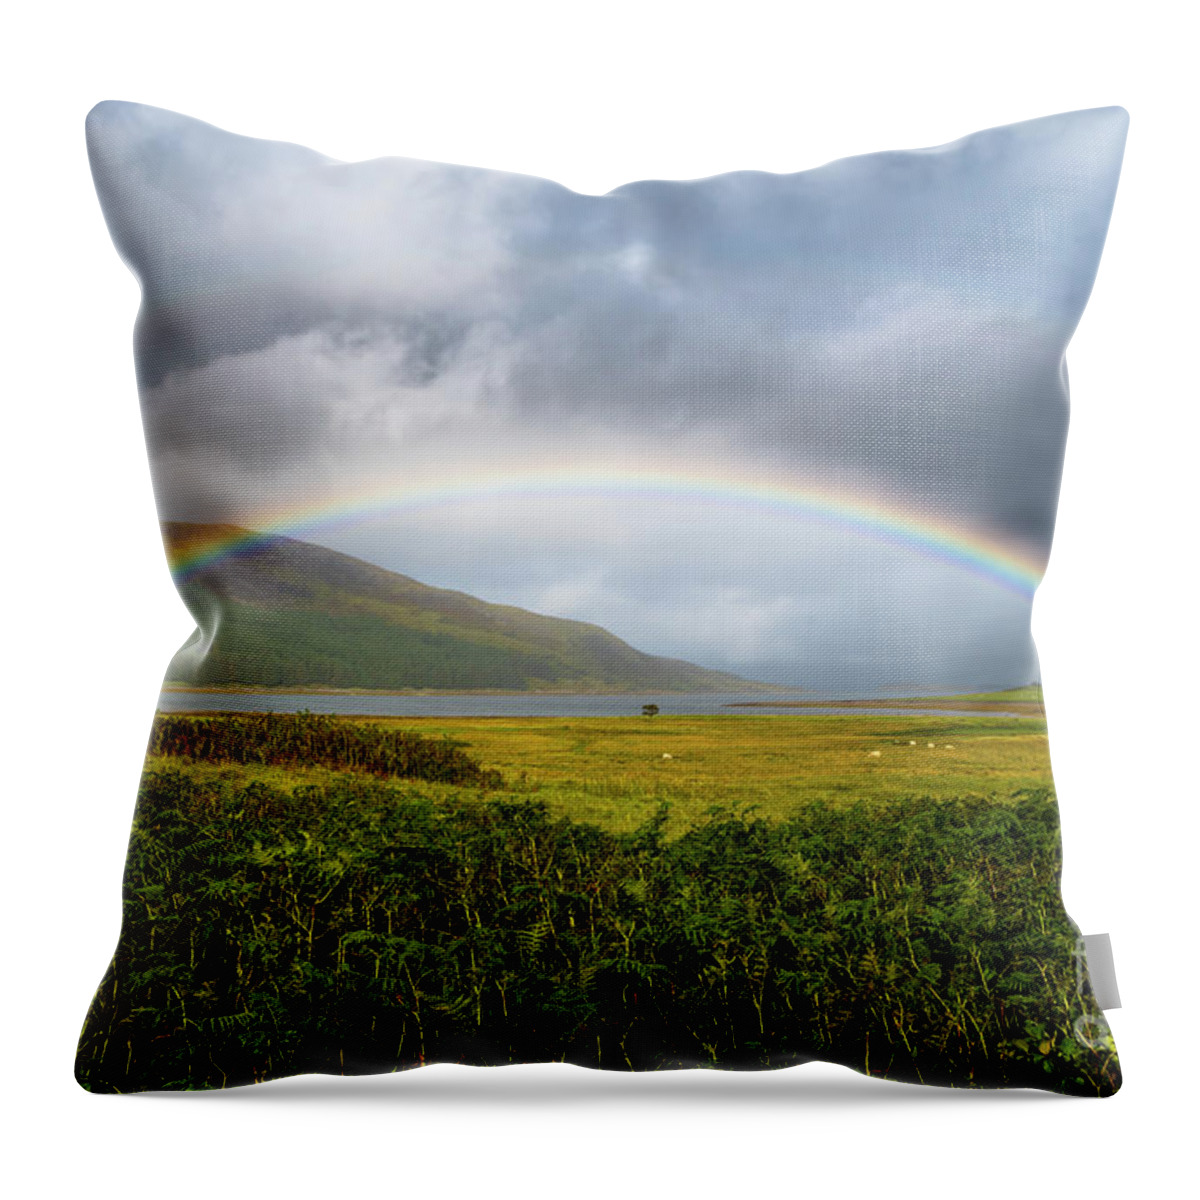 Agriculture Throw Pillow featuring the photograph Colorful Rainbow Over Fresh Pasture With Sheep On The Isle Of Skye In Scotland by Andreas Berthold